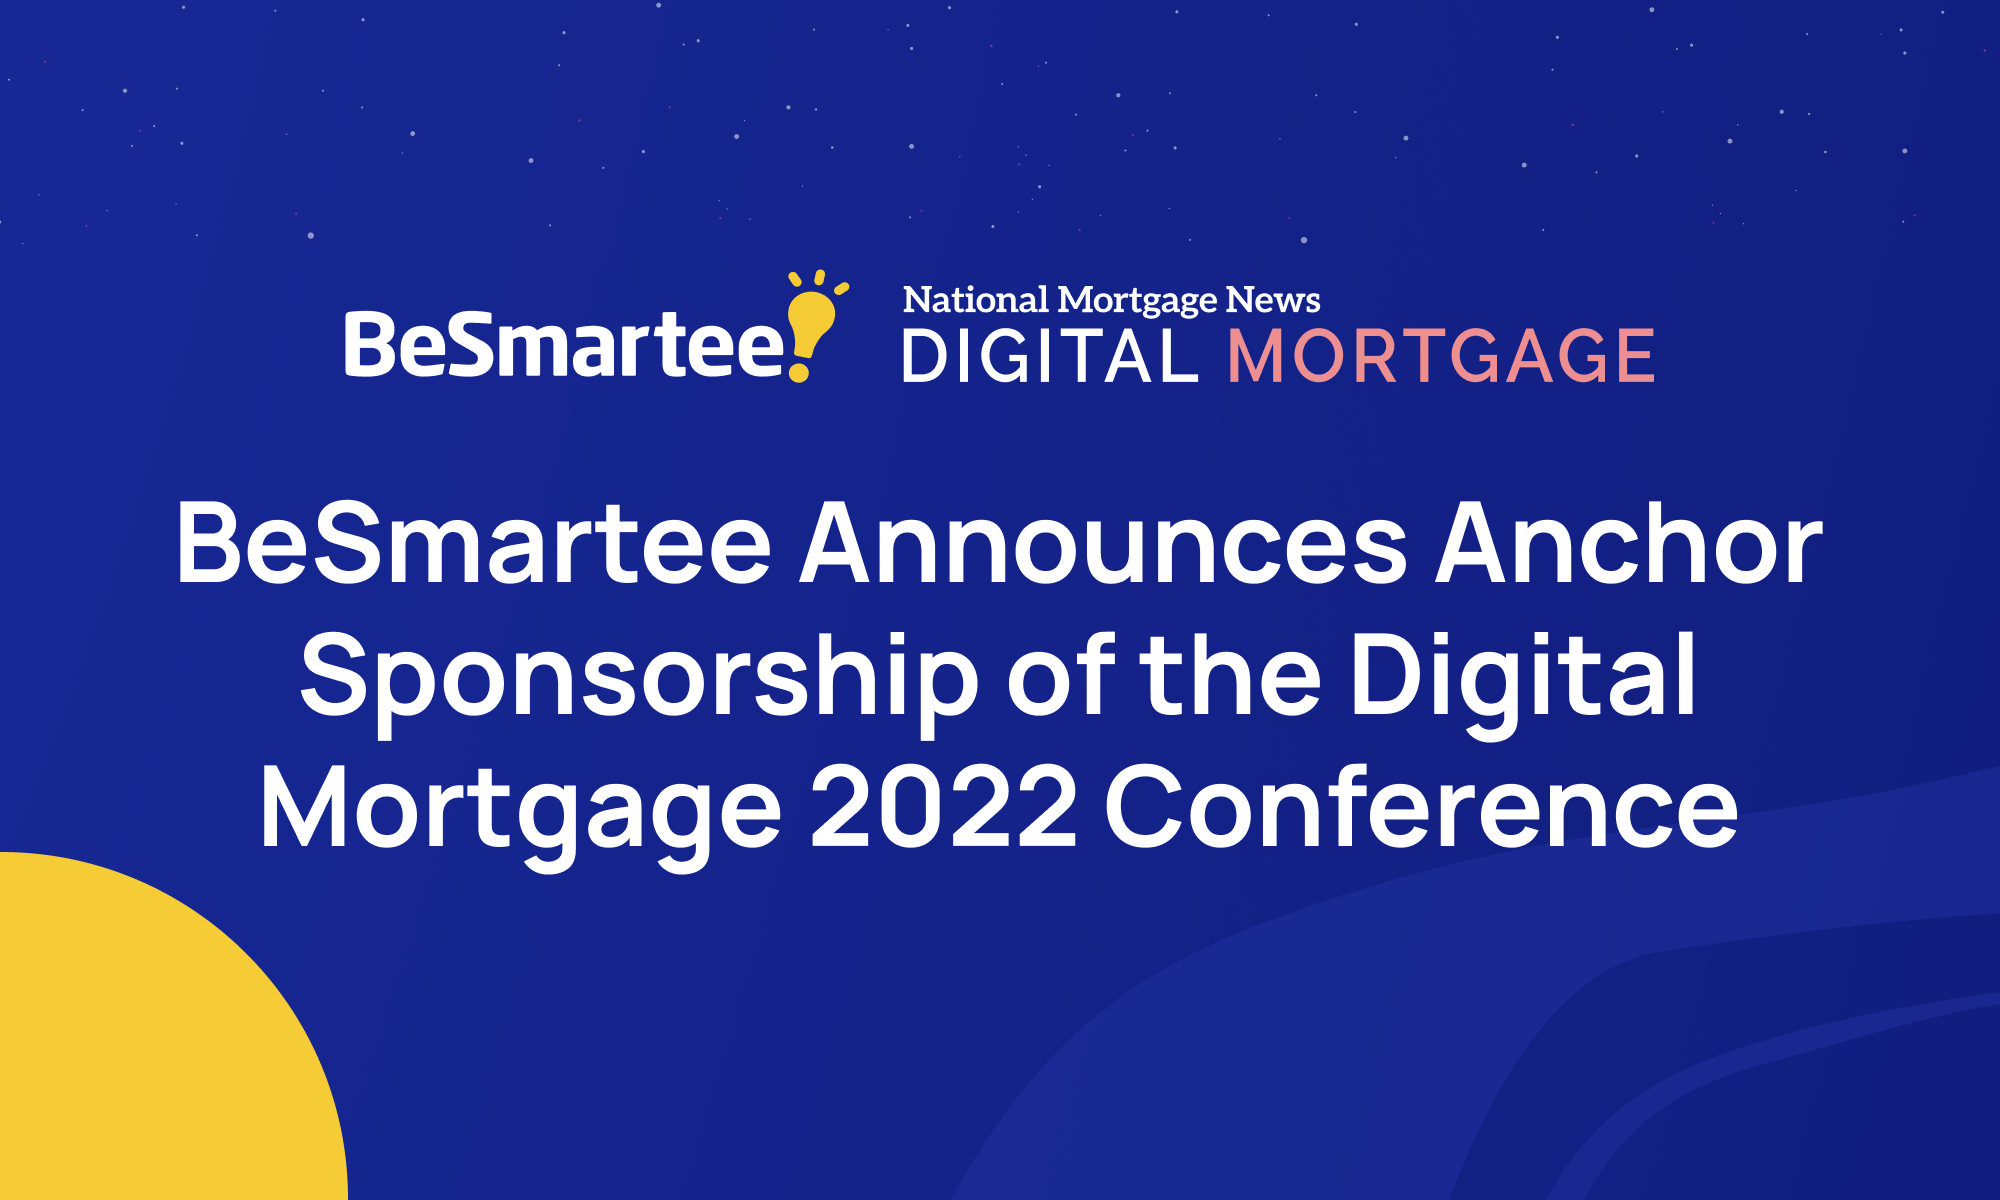 BeSmartee Announces Anchor Sponsorship of the Digital Mortgage 2022 Conference